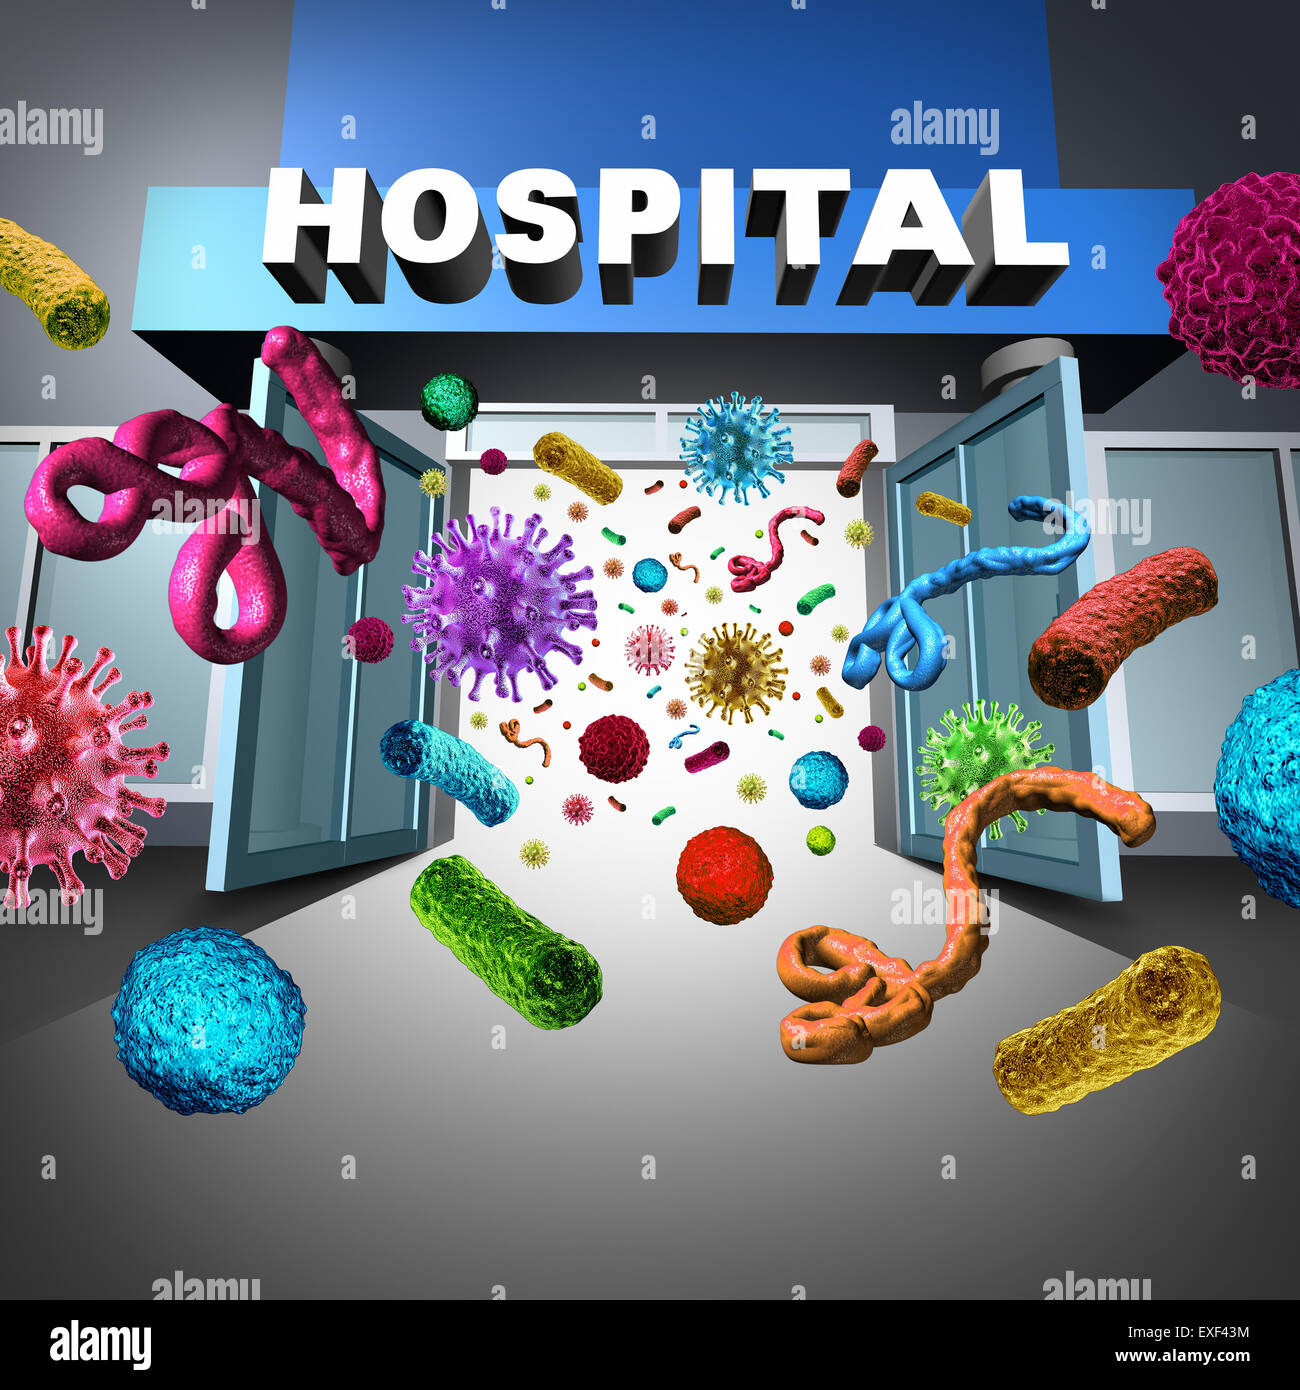 Hospital germs spreading and super bug bacteria and bacterium cells floating in microscopic space as a medical concept of bacter Stock Photo